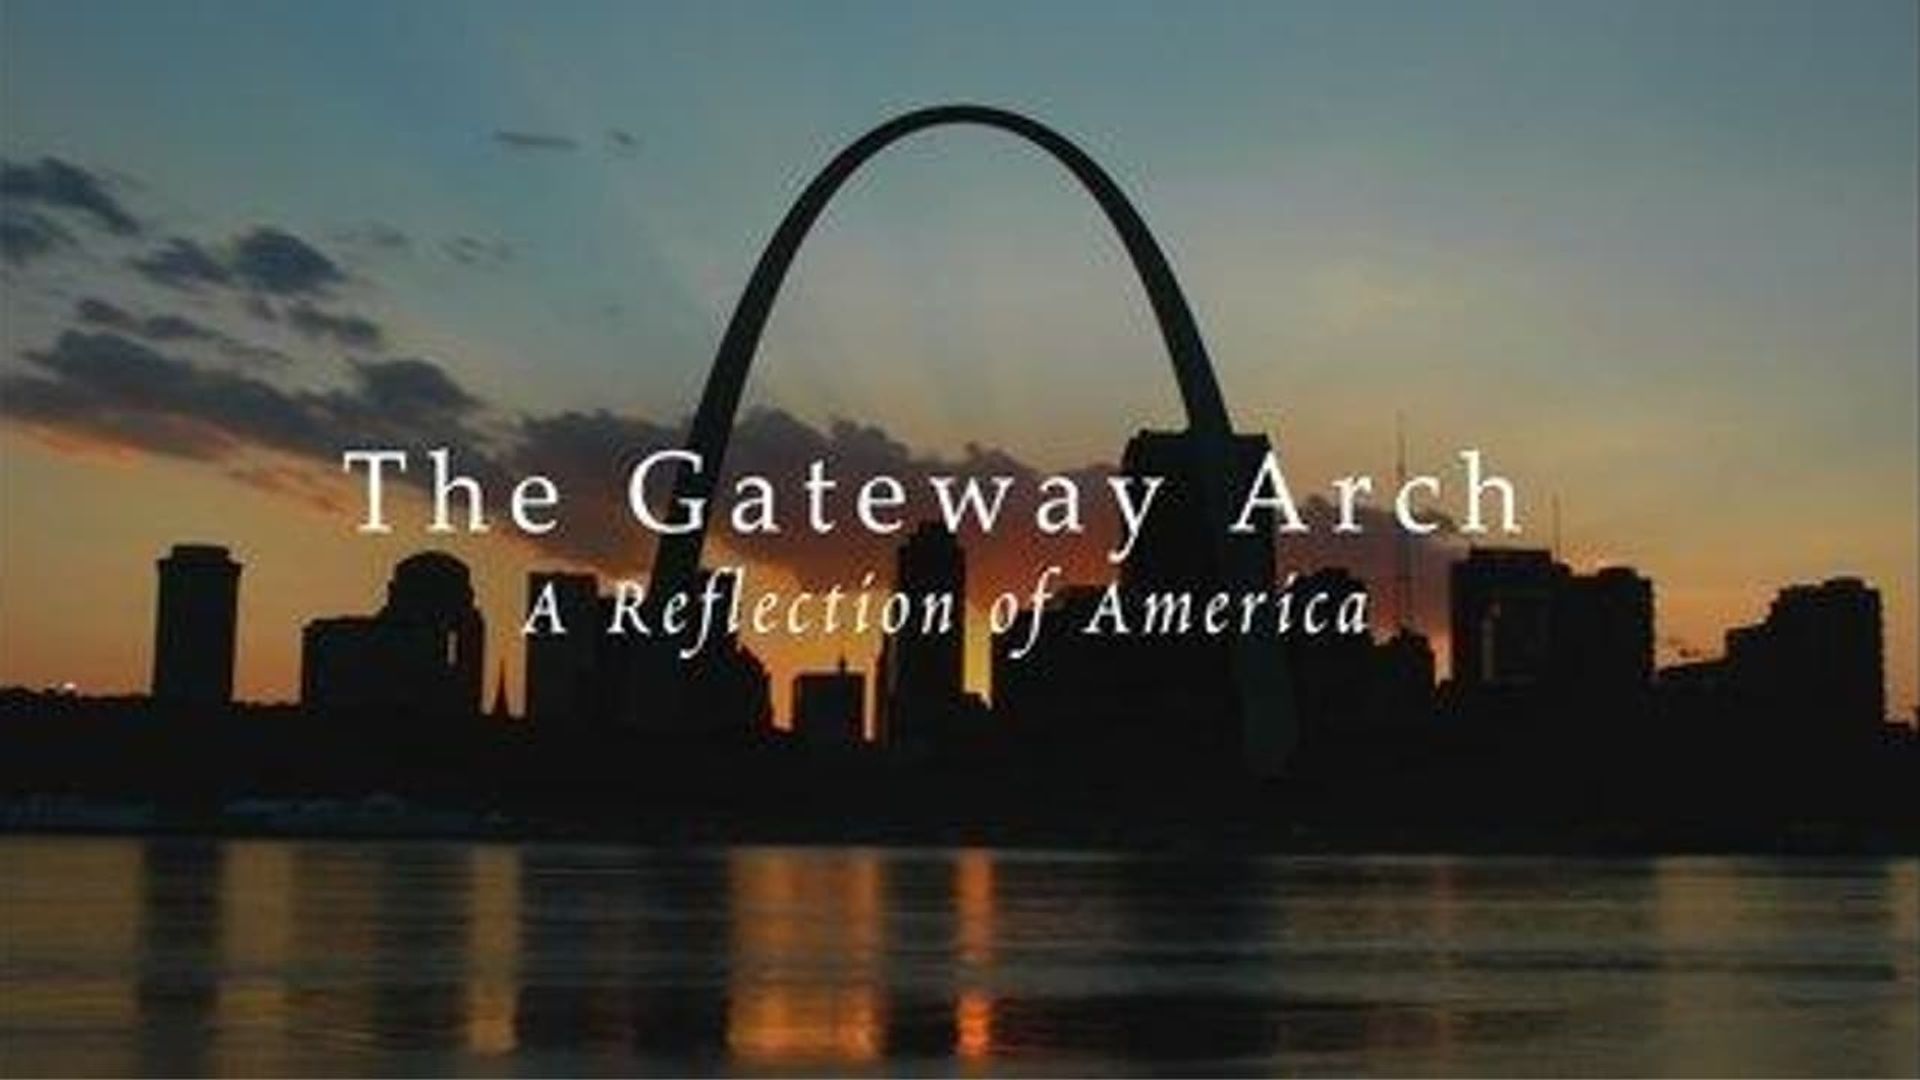 The Gateway Arch: A Reflection of America background